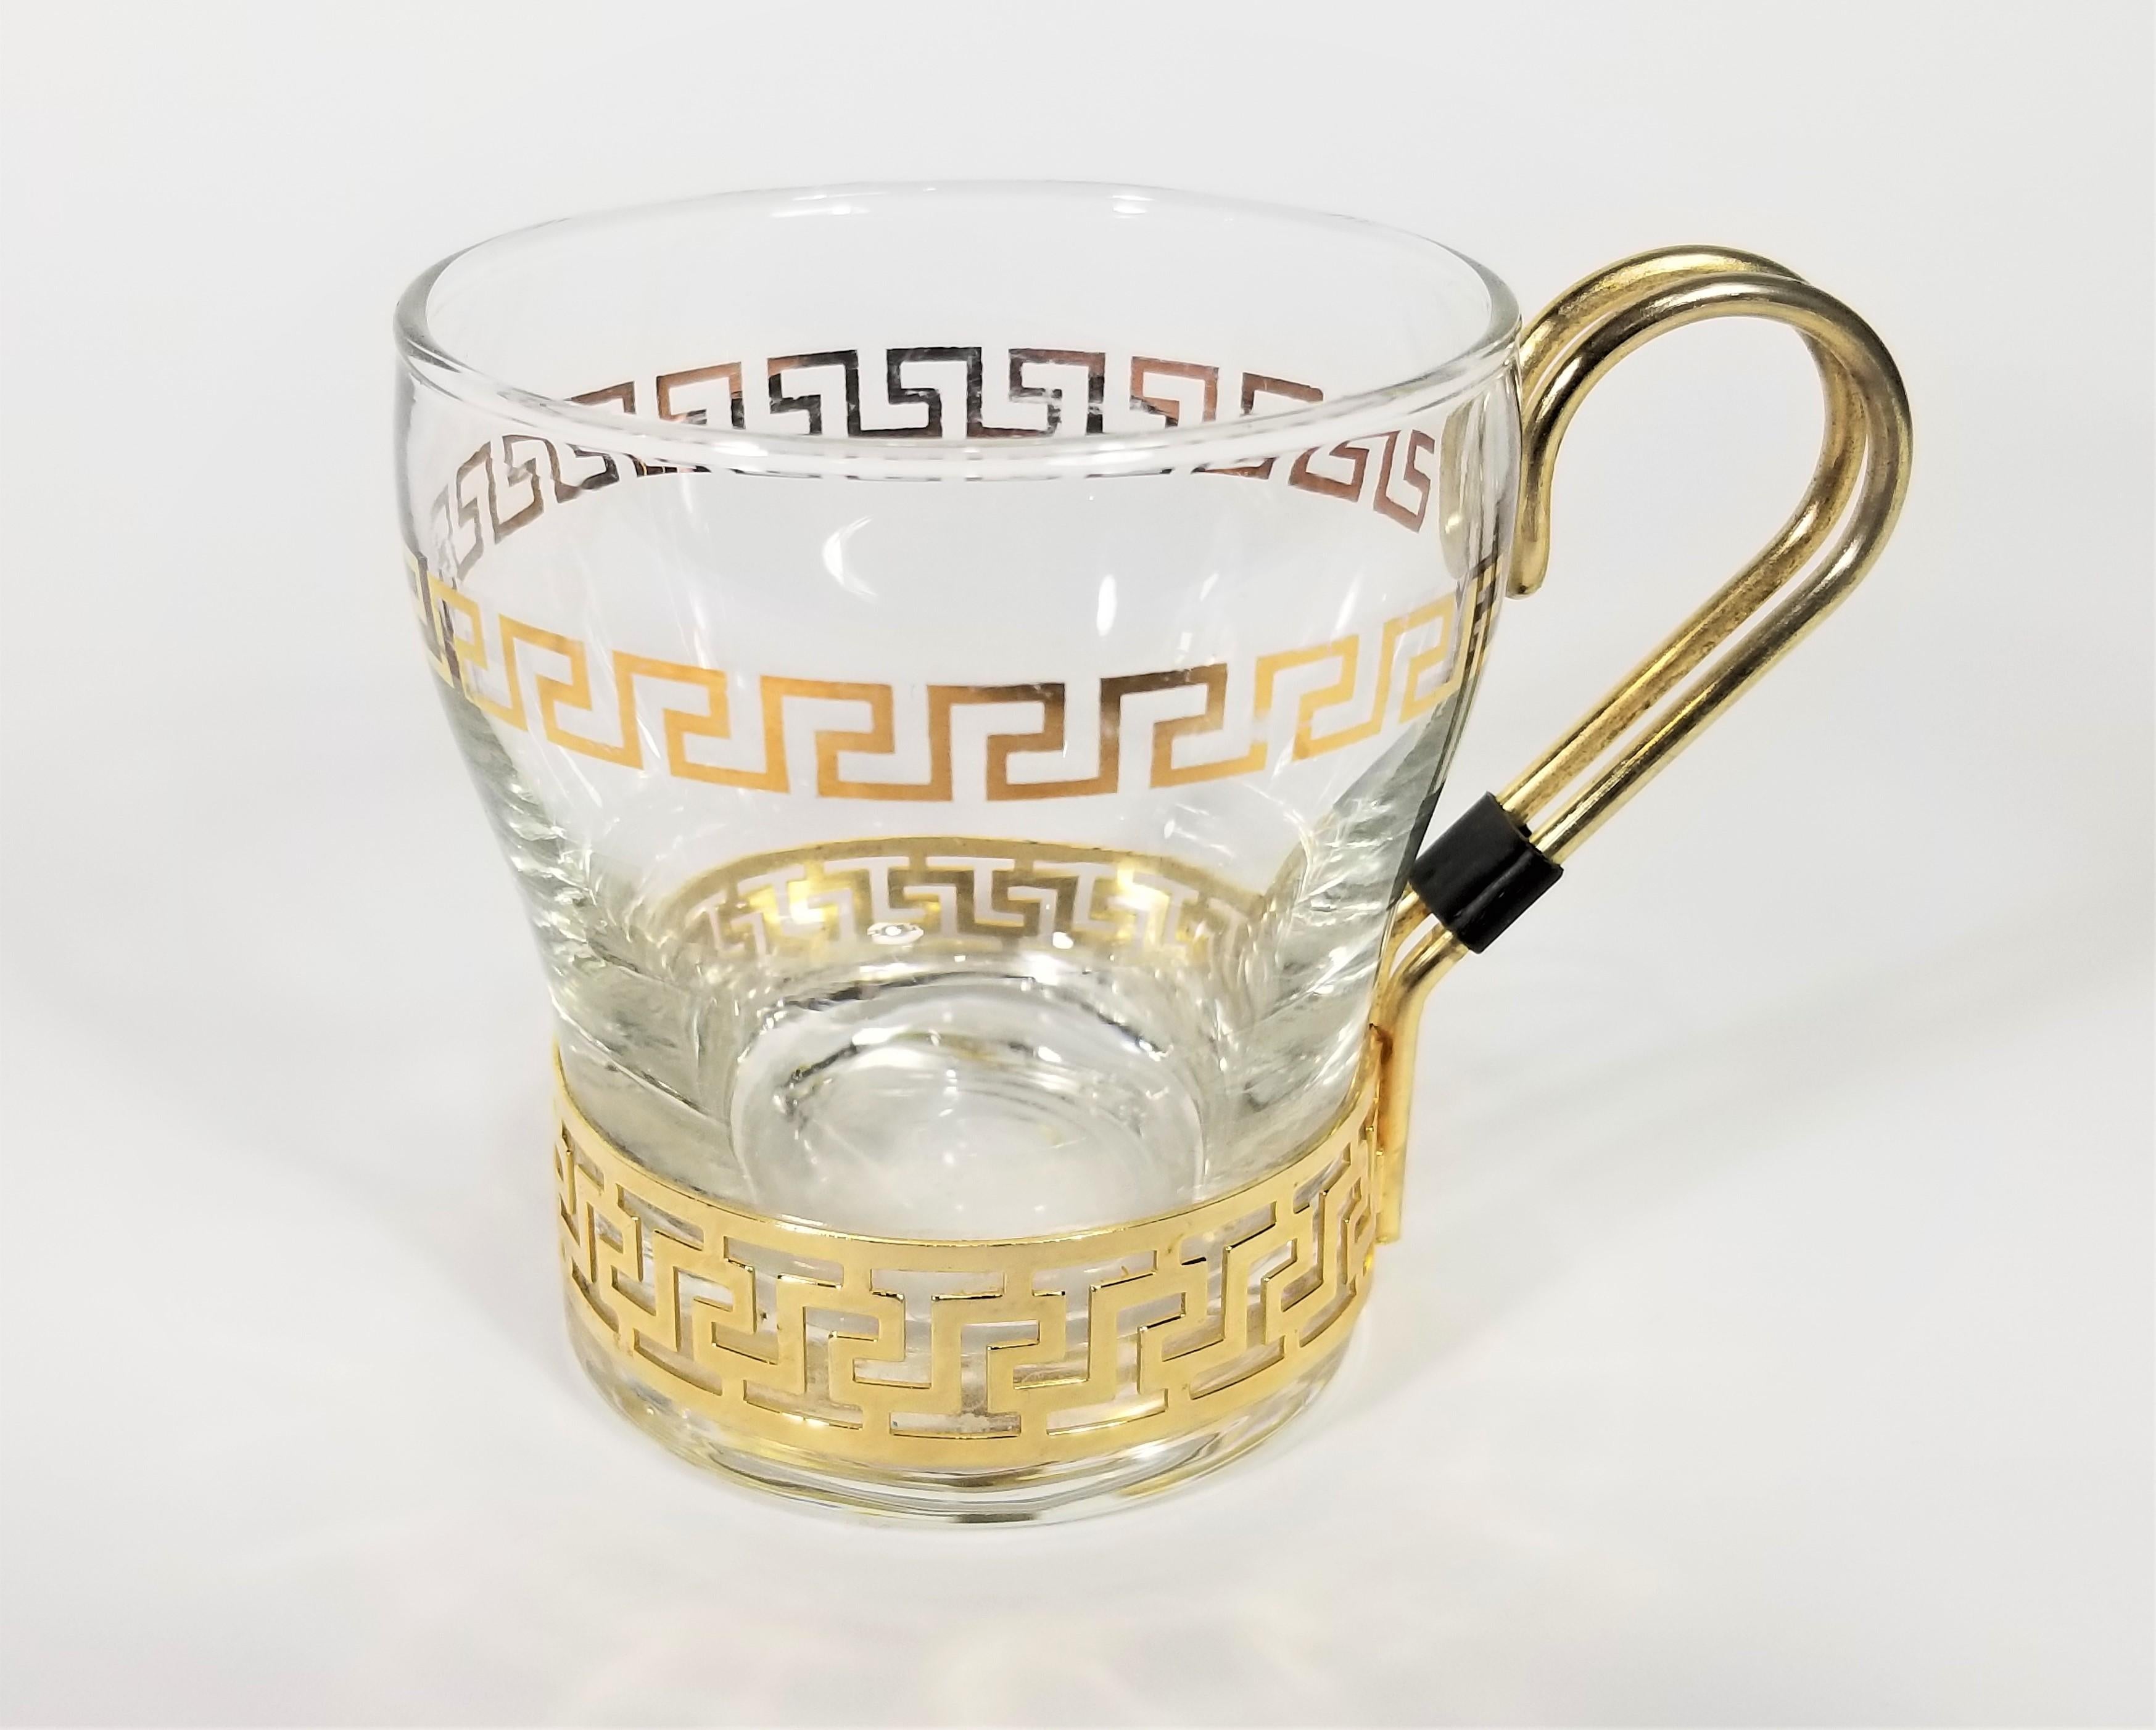 Libbey Greek Key Glassware with Gold Design Midcentury For Sale 1